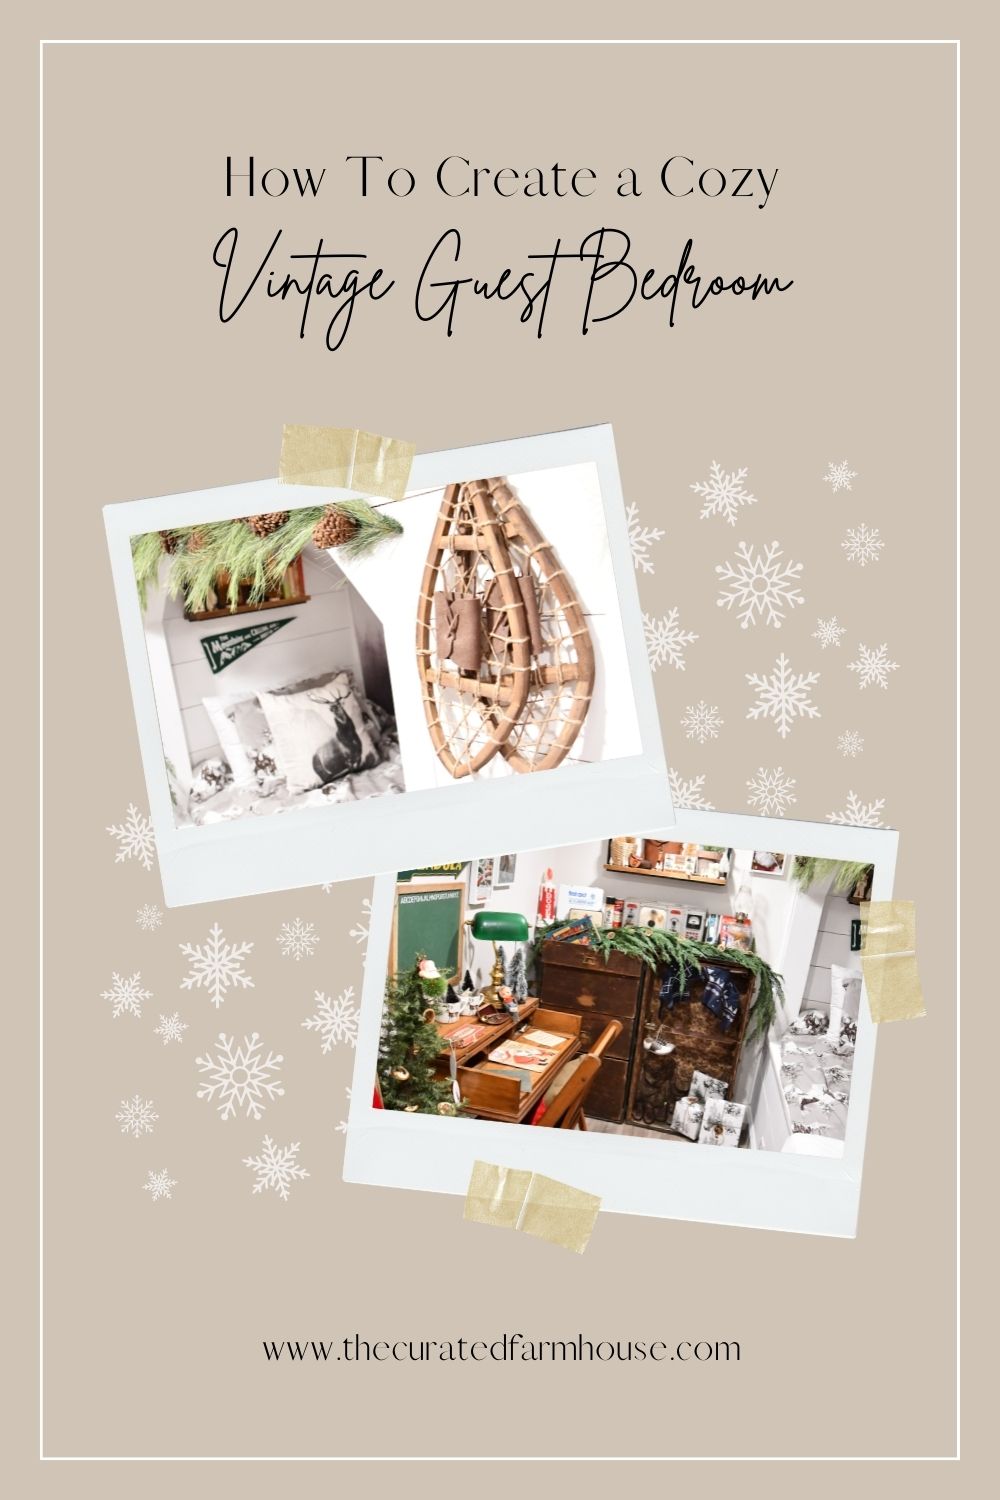 How To Create A Cozy Vintage Christmas Bedroom